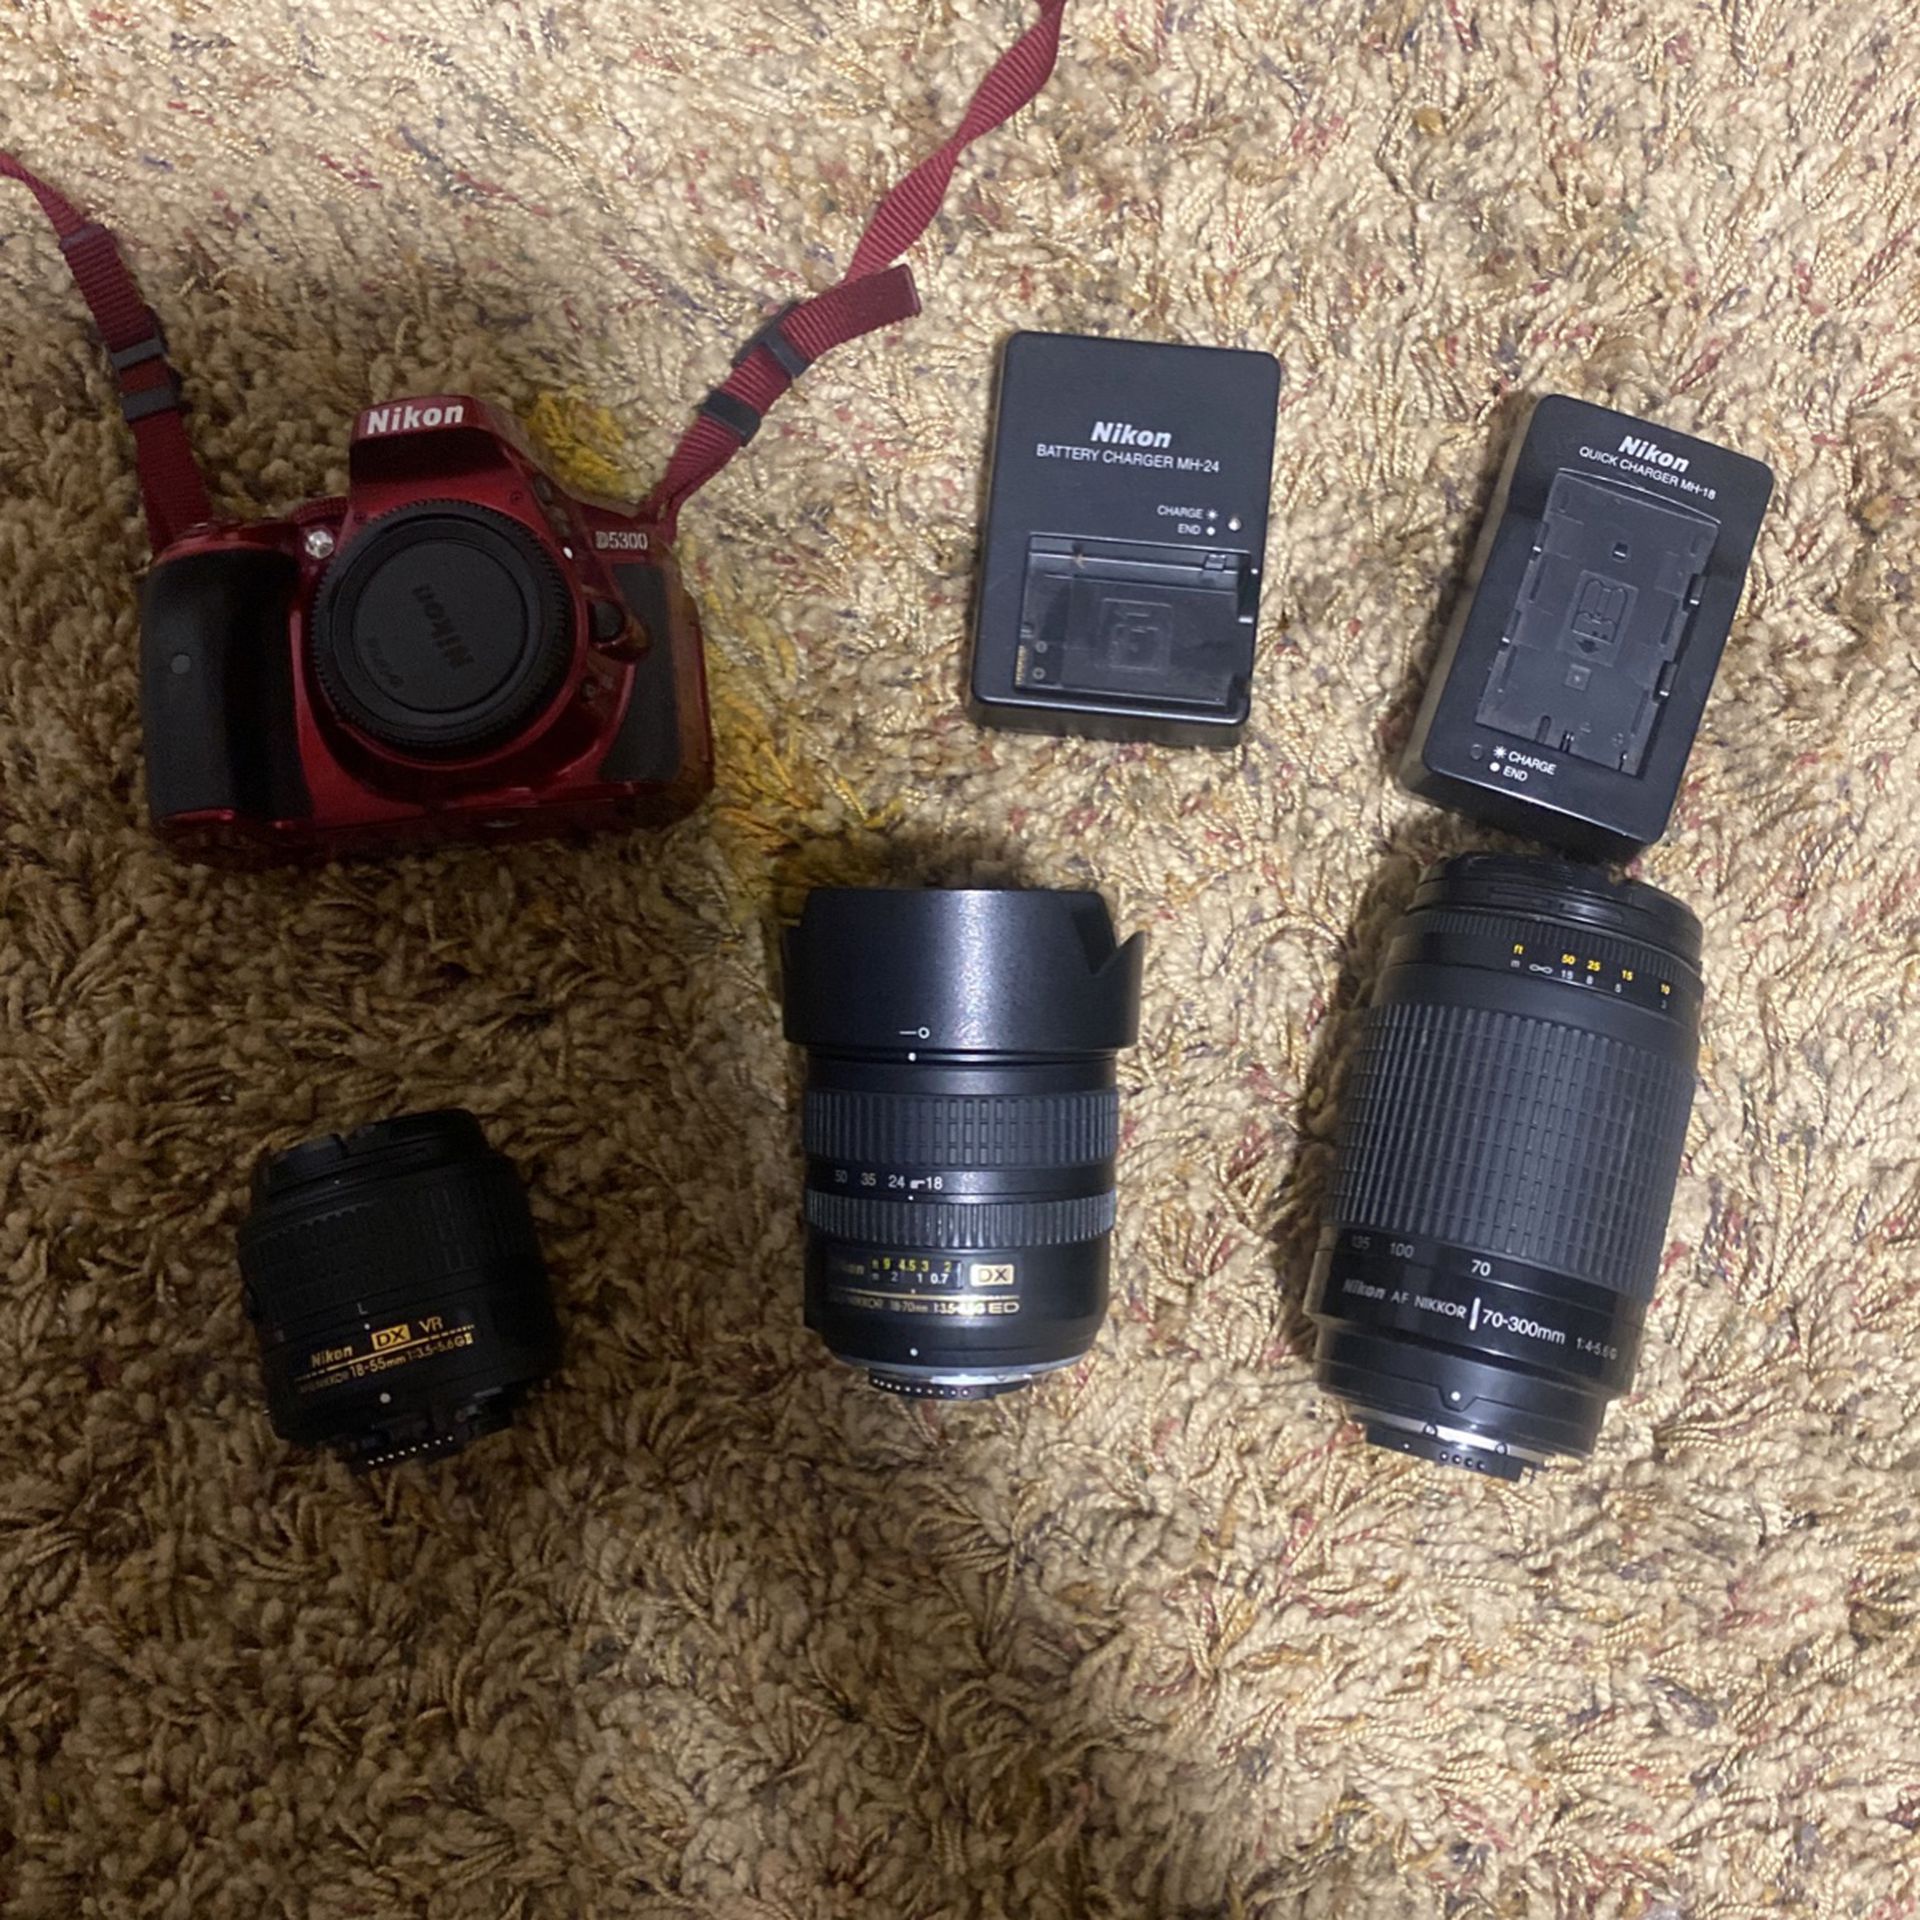 Nikon Camera And Equipment (Includes Everything)